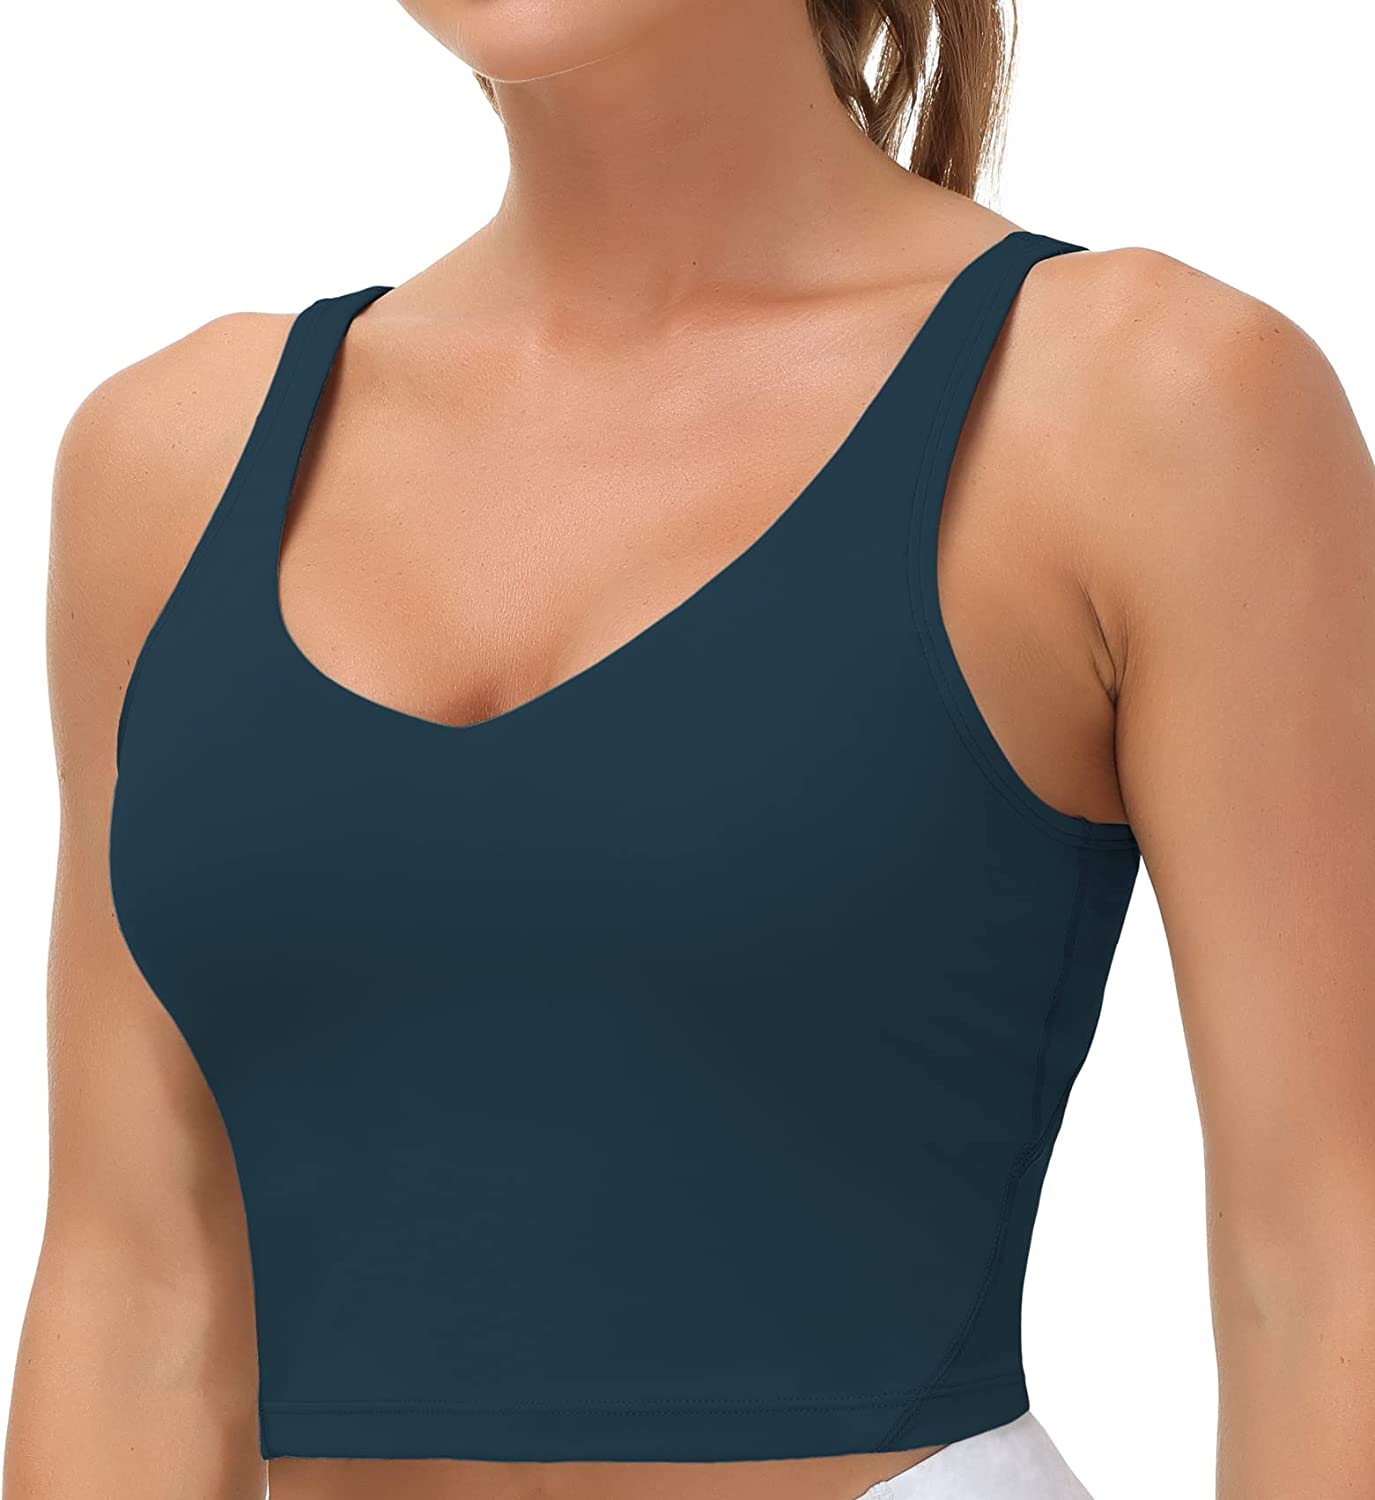 Womens' Sports Bra Longline Wirefree Padded with Medium Support